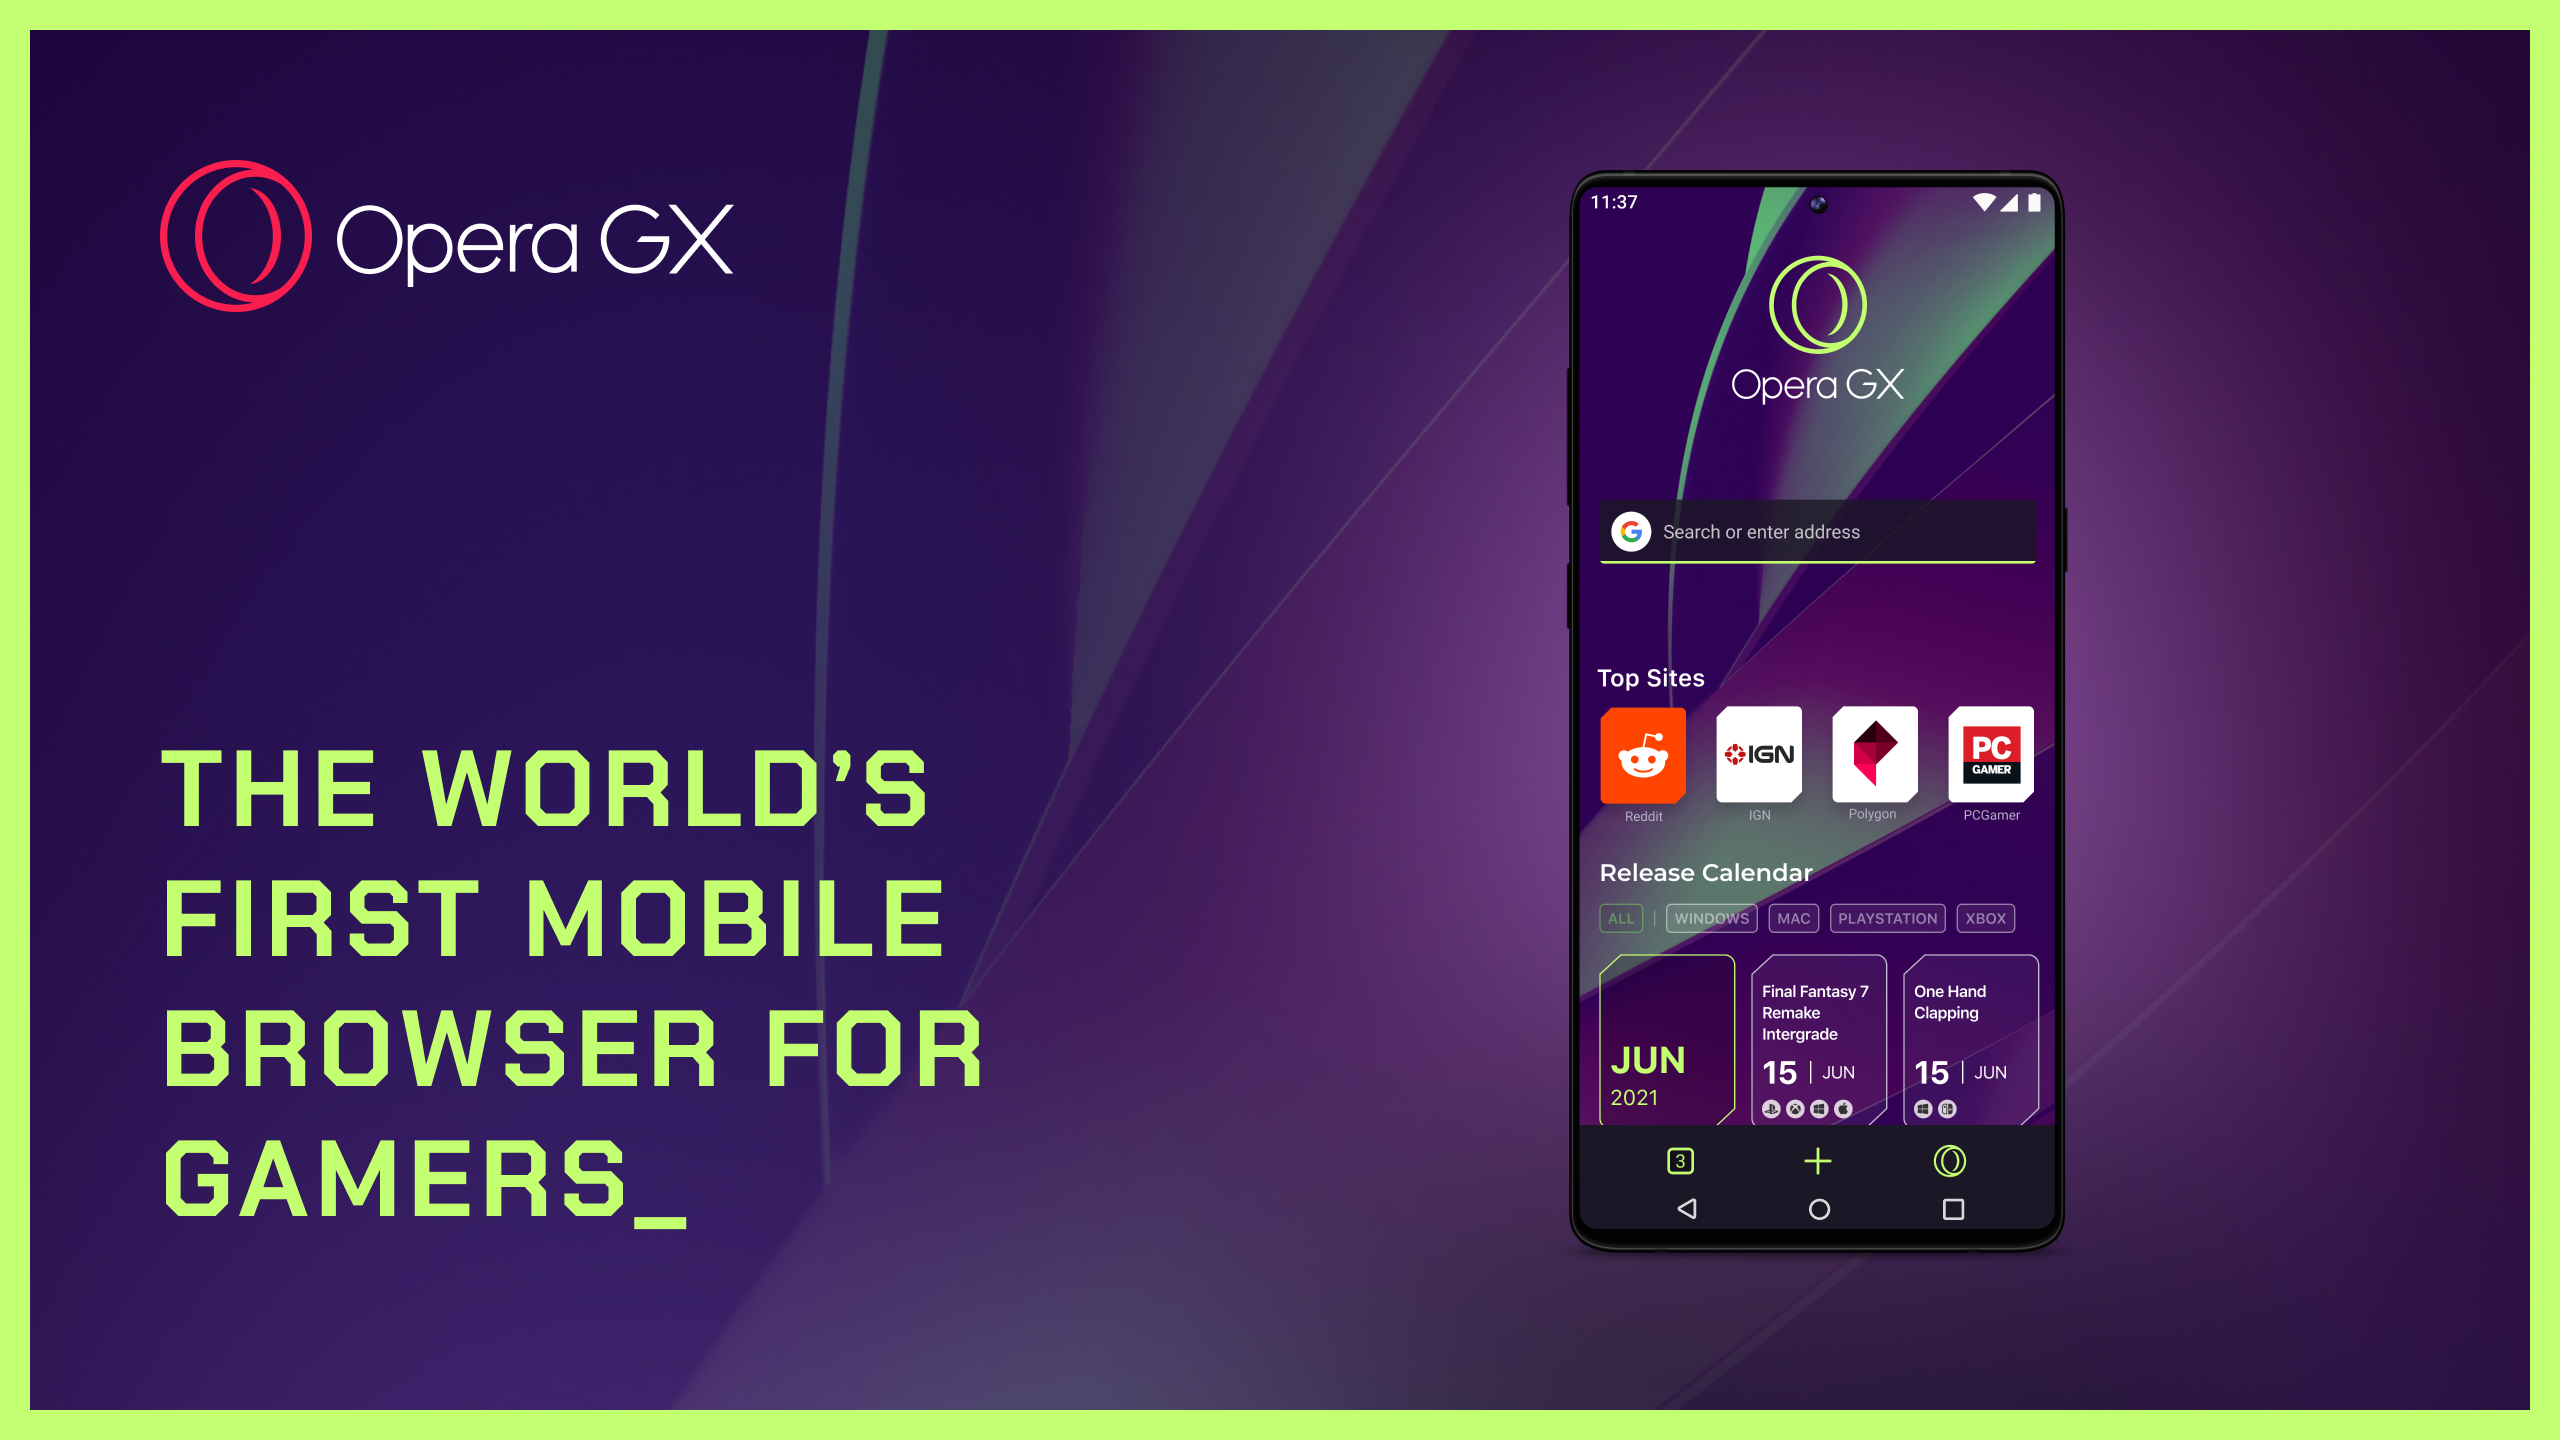 Opera GX Mobile World's first mobile browser for gamers